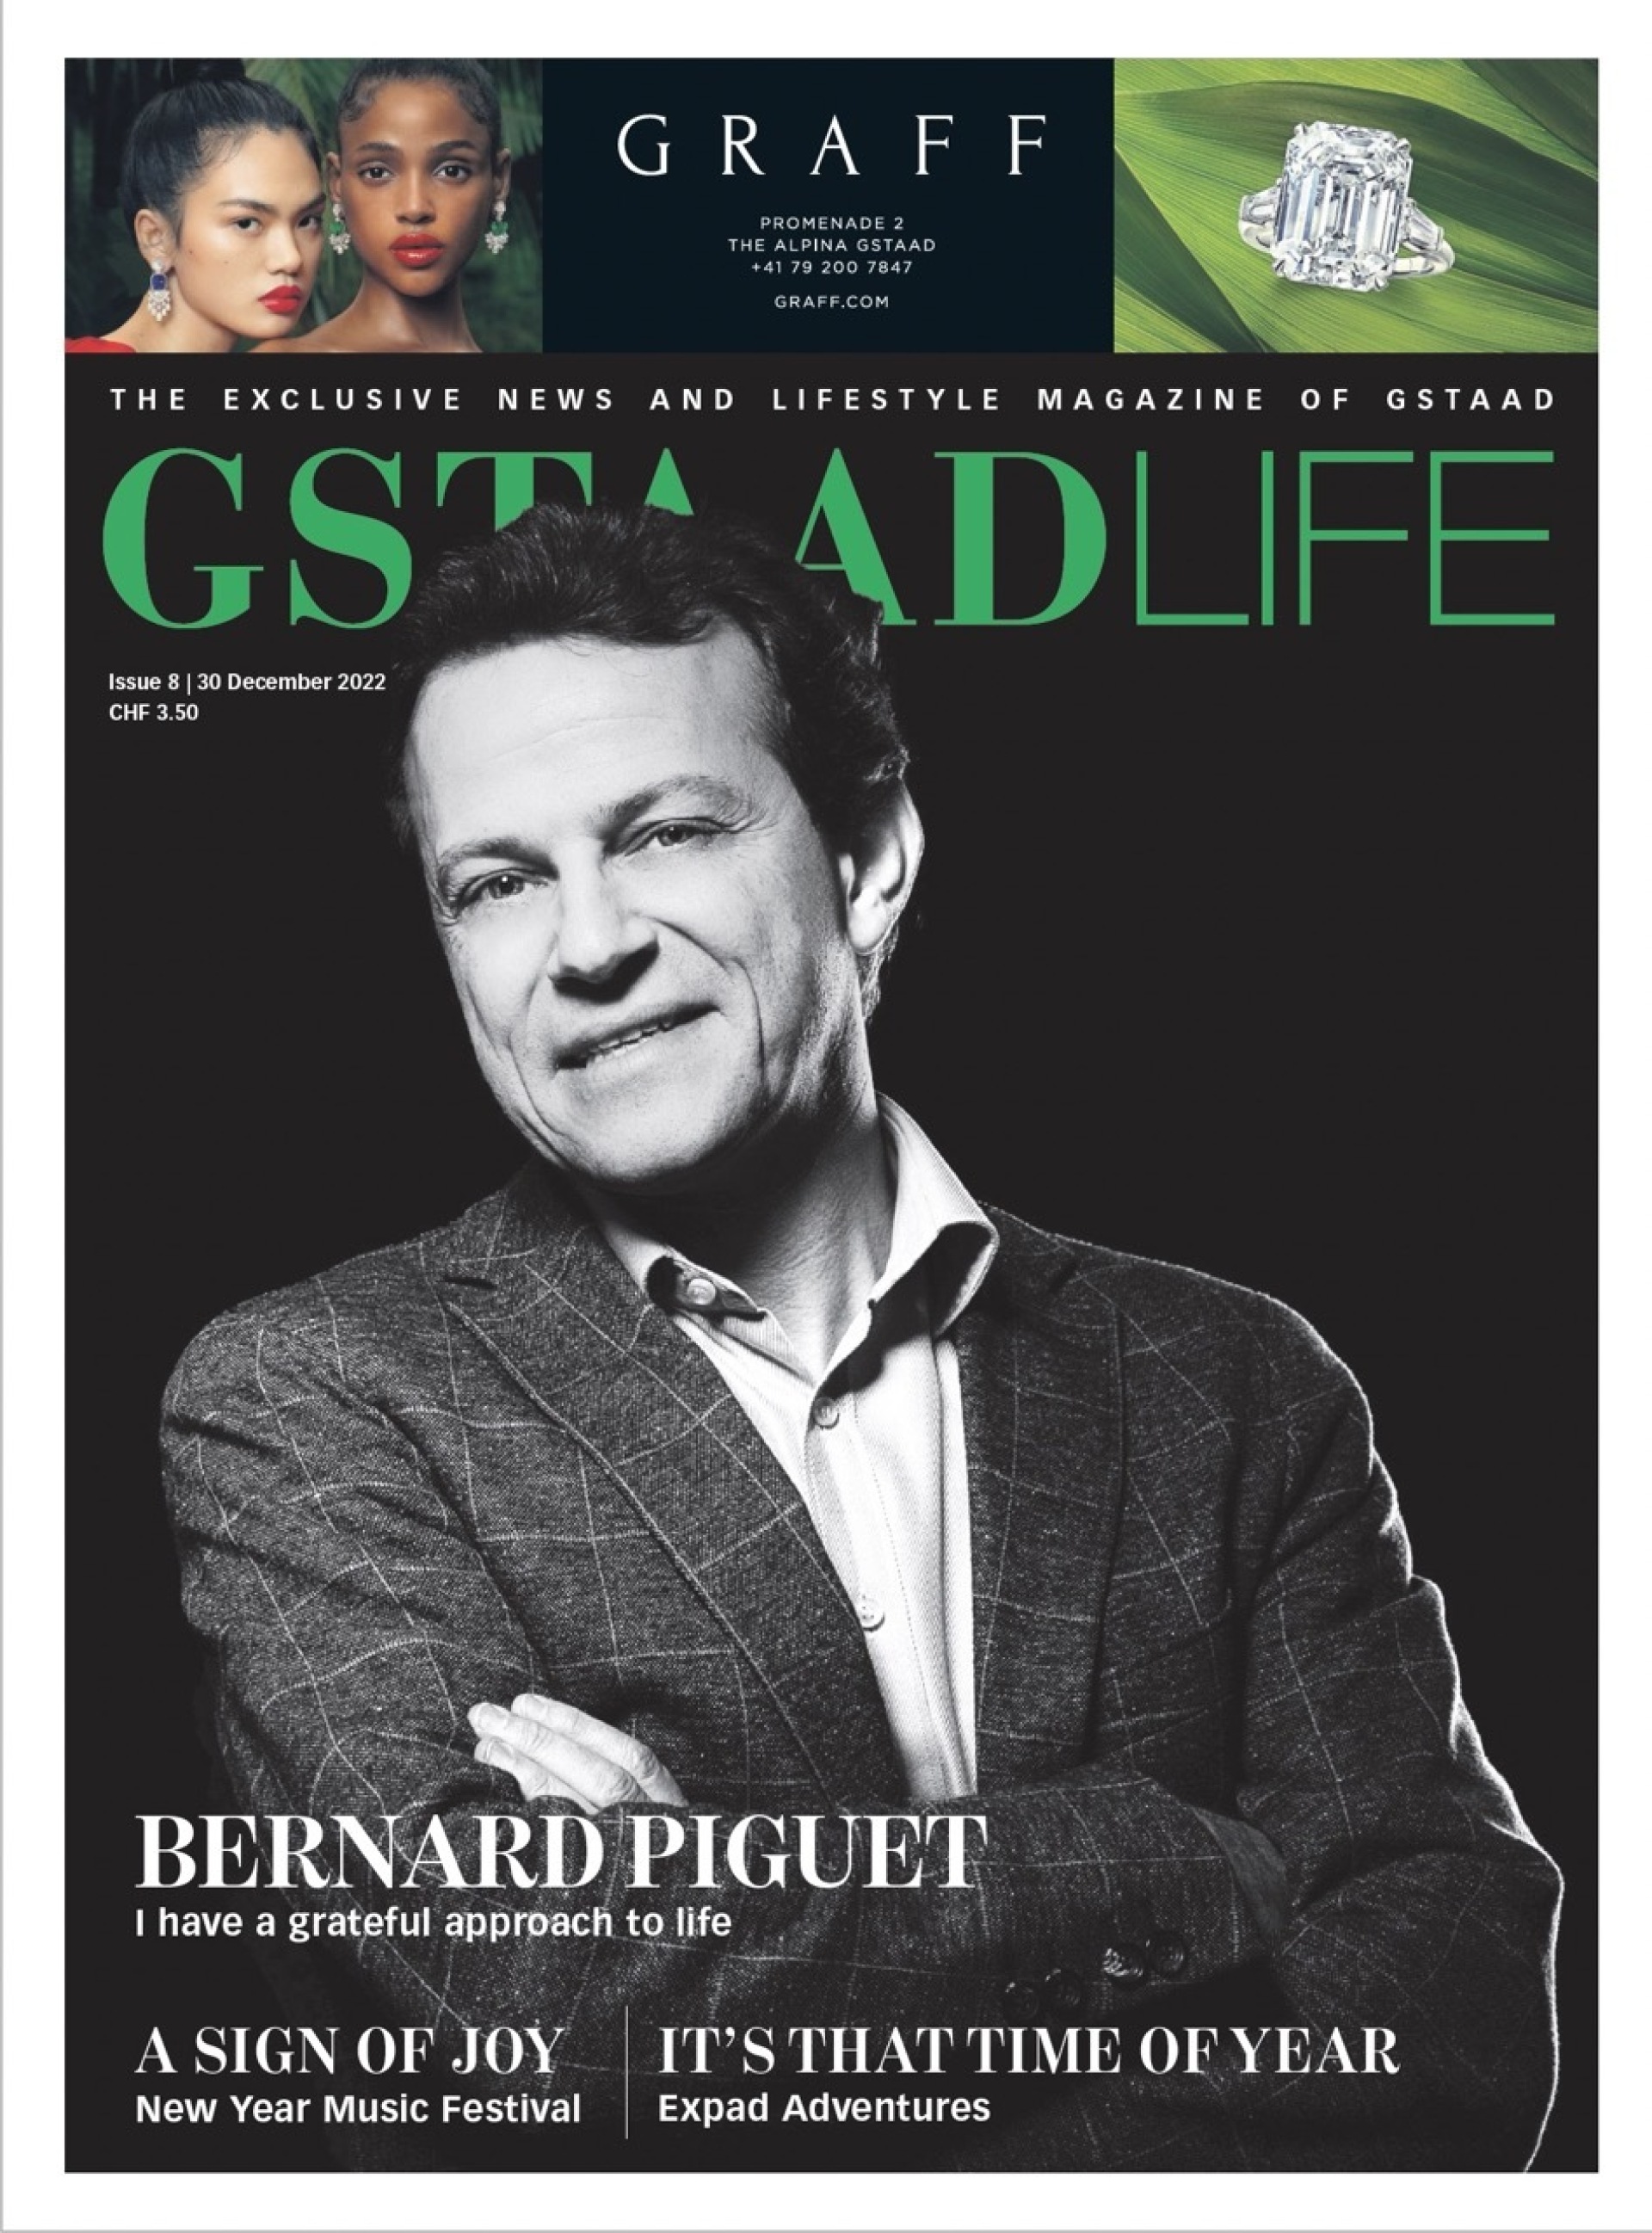 Bernard Piguet is on the cover of the New Years issue, interviewed by Alan Ipekian